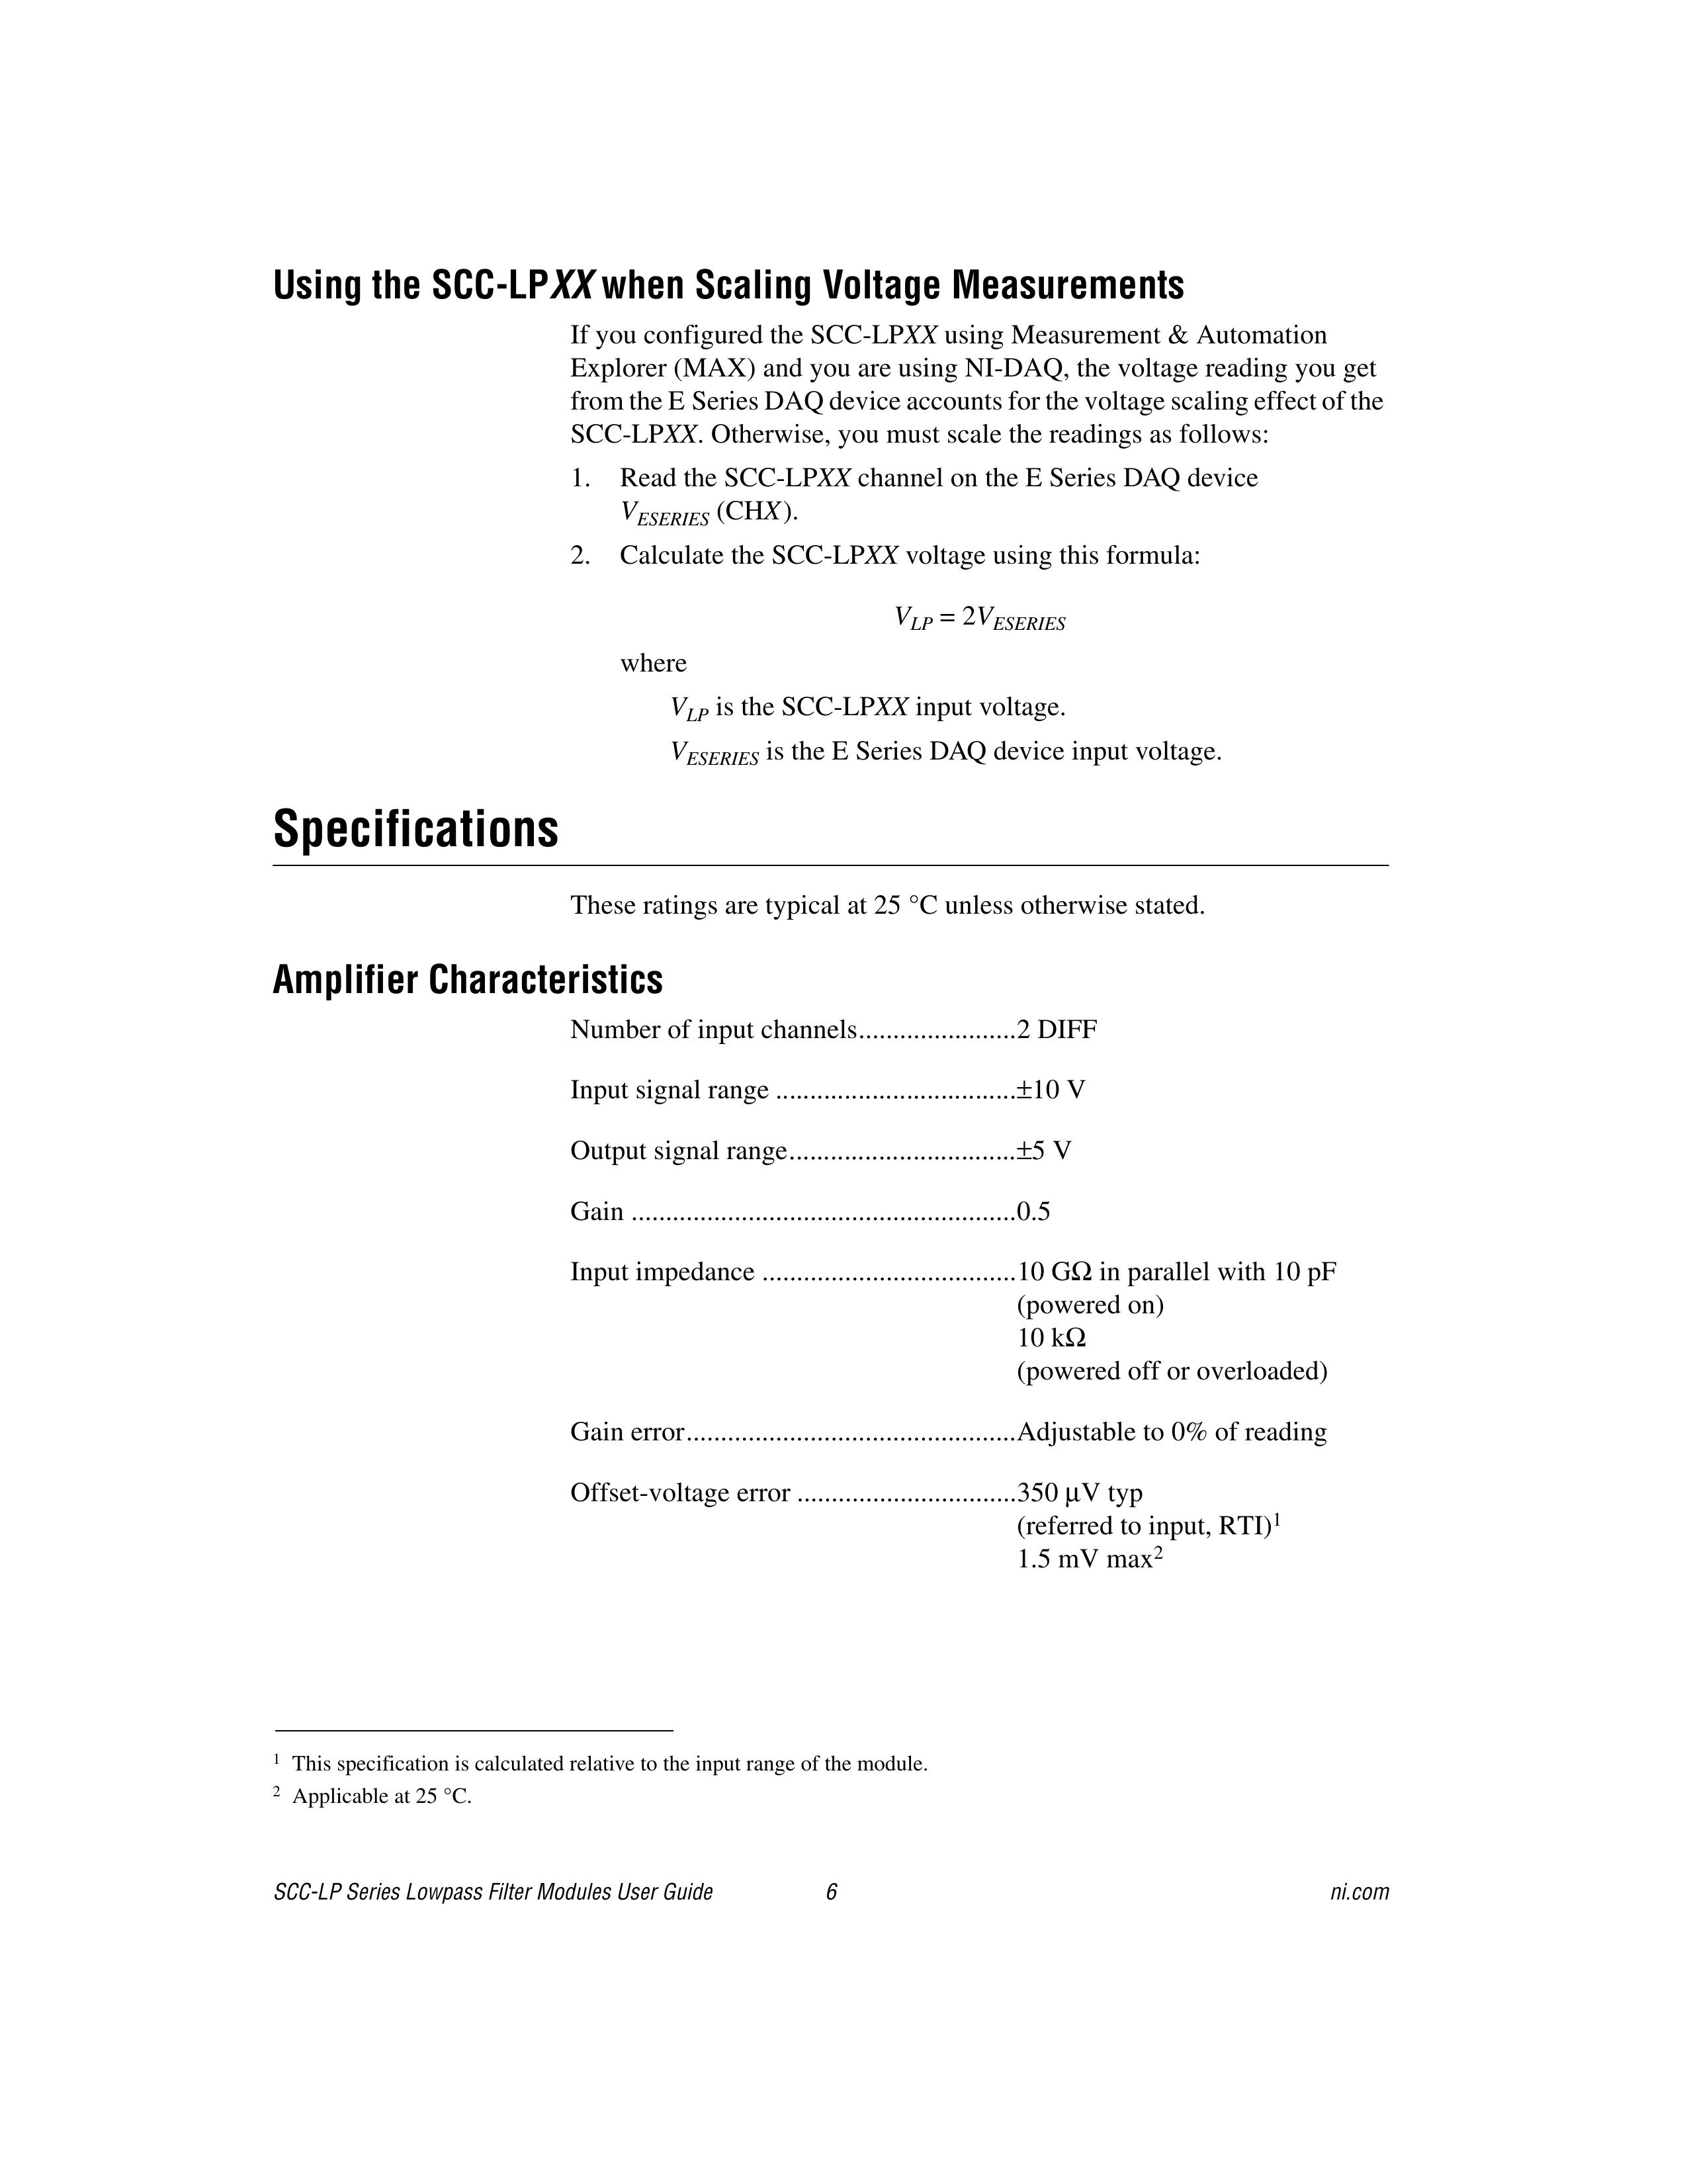 National Instruments SCC-LP04 Dryer Accessories User Manual (Page 6)